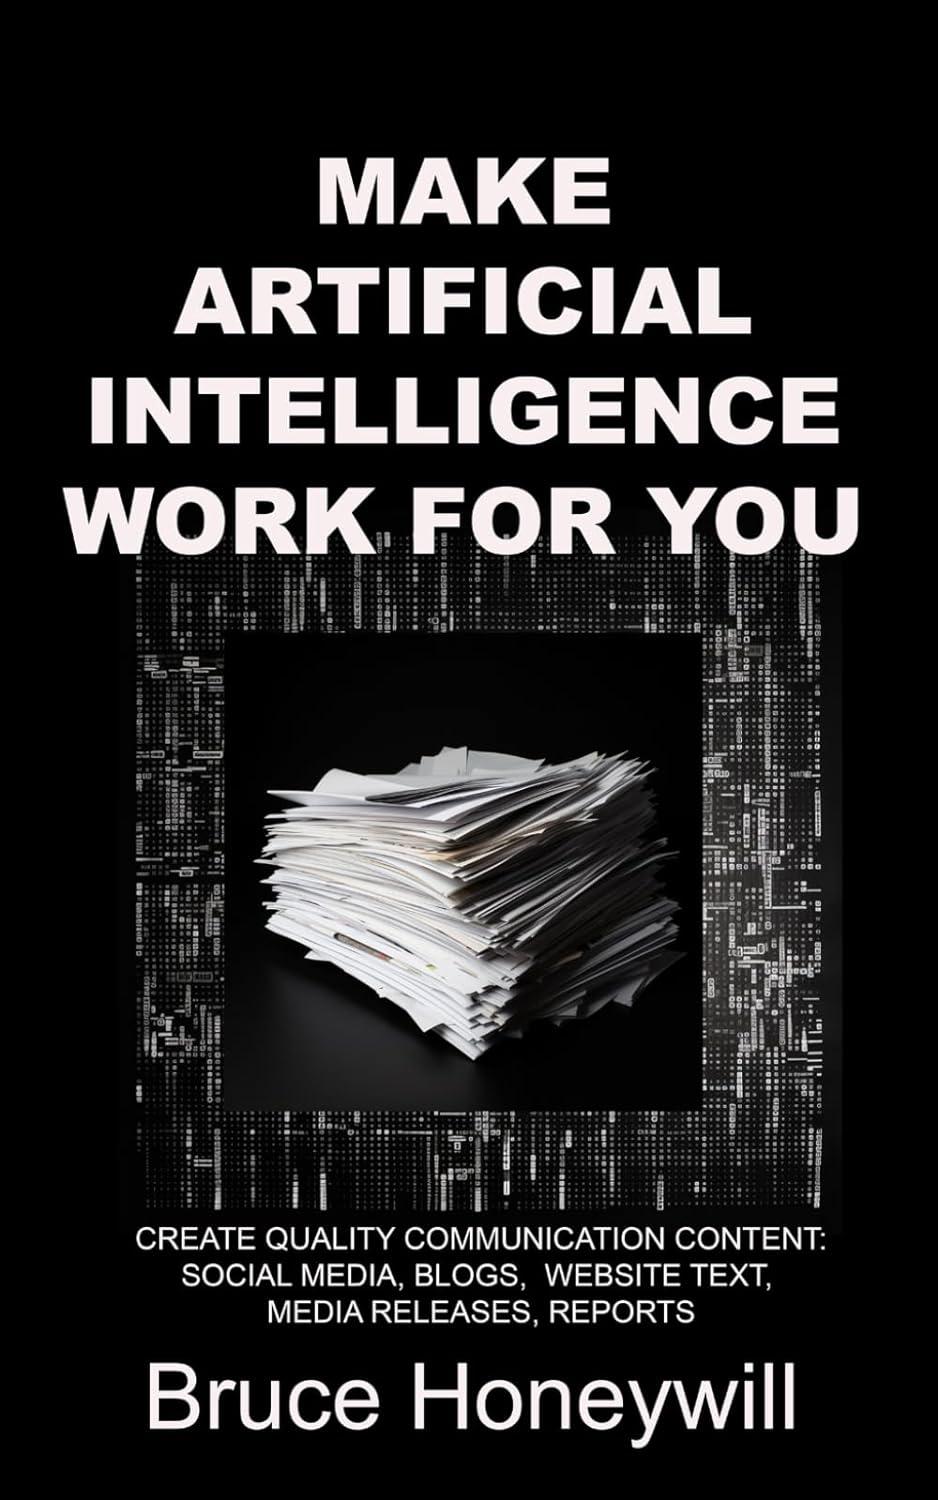 make artificial intelligence work for you 1st edition bruce honeywill 064596980x, 978-0645969801